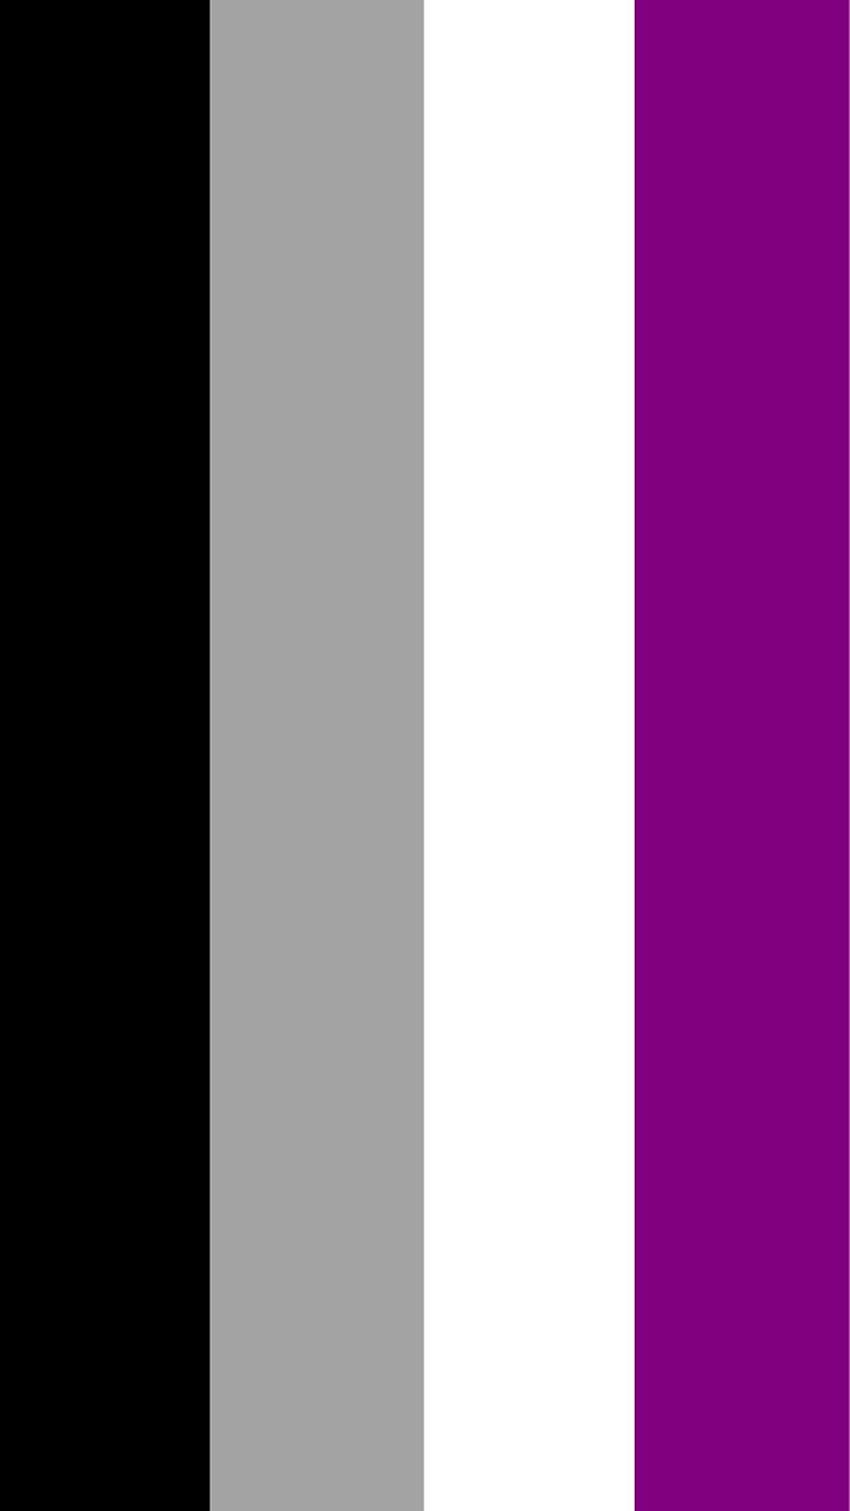 I Made A Mobile Of The Flag, Let Me Know What Phone You Have And I'll Make The Perfect Size For You. This One Is IPhone 6: px [xpost R Asexual] HD phone wallpaper